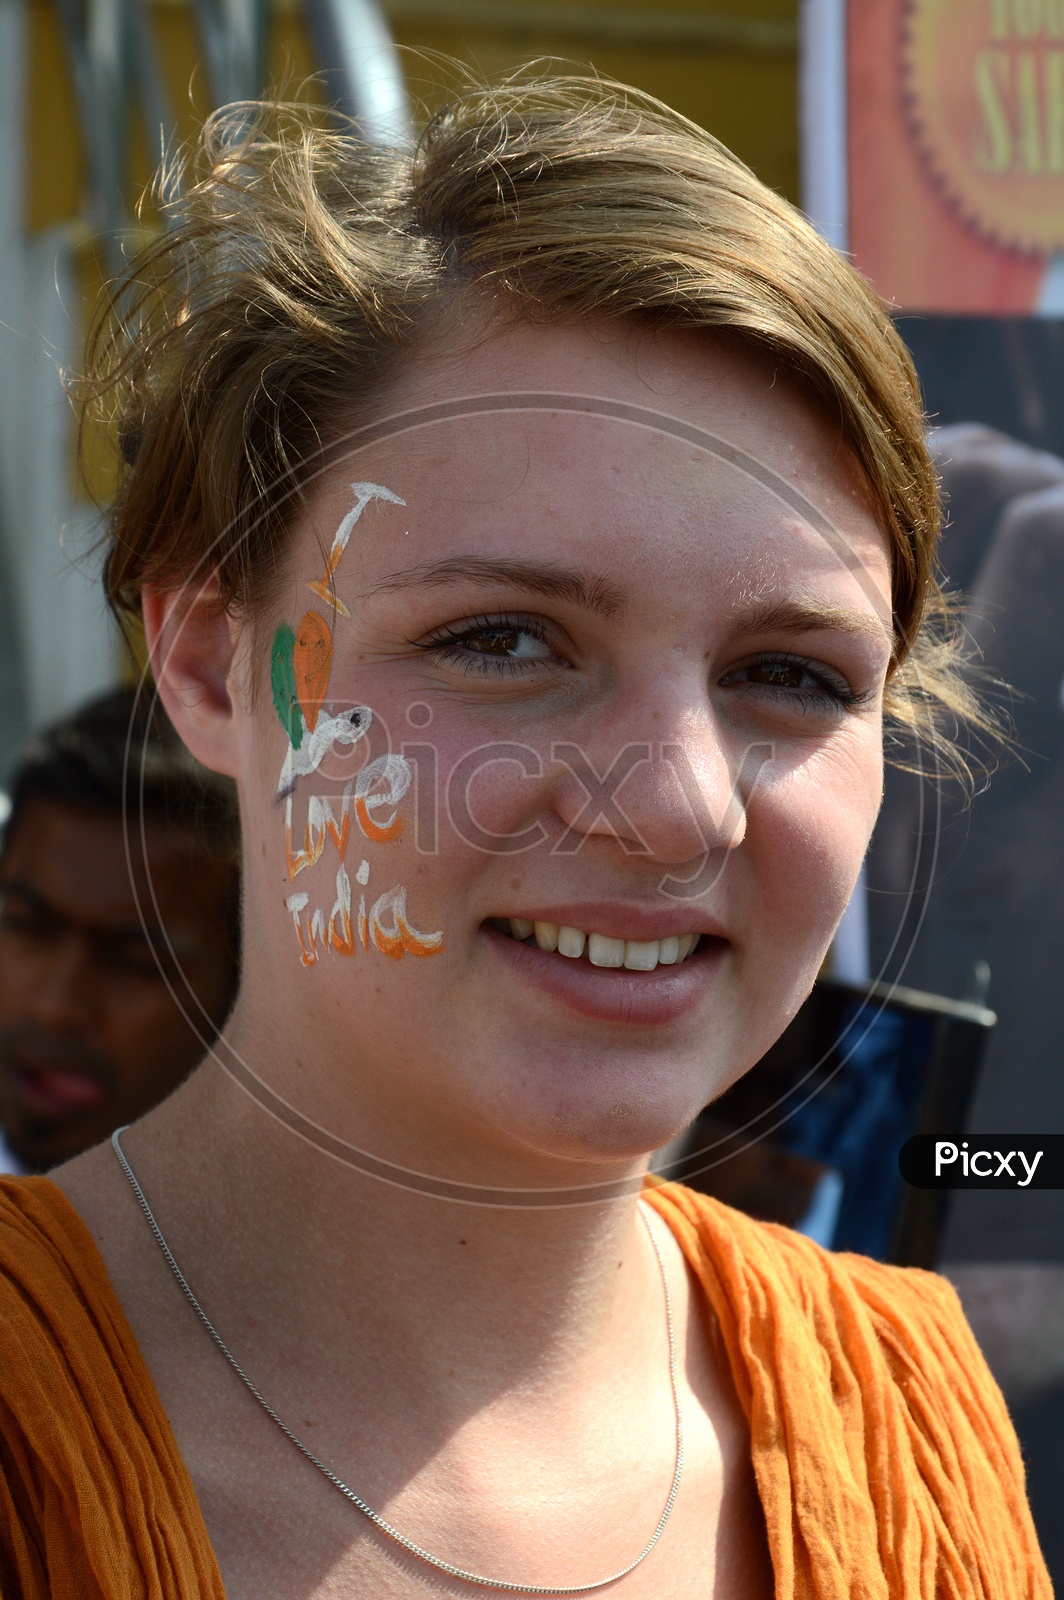 A Foreign Lady  Pasting Indian National Tri-Colors On the Cheek Celebrating Independence Day